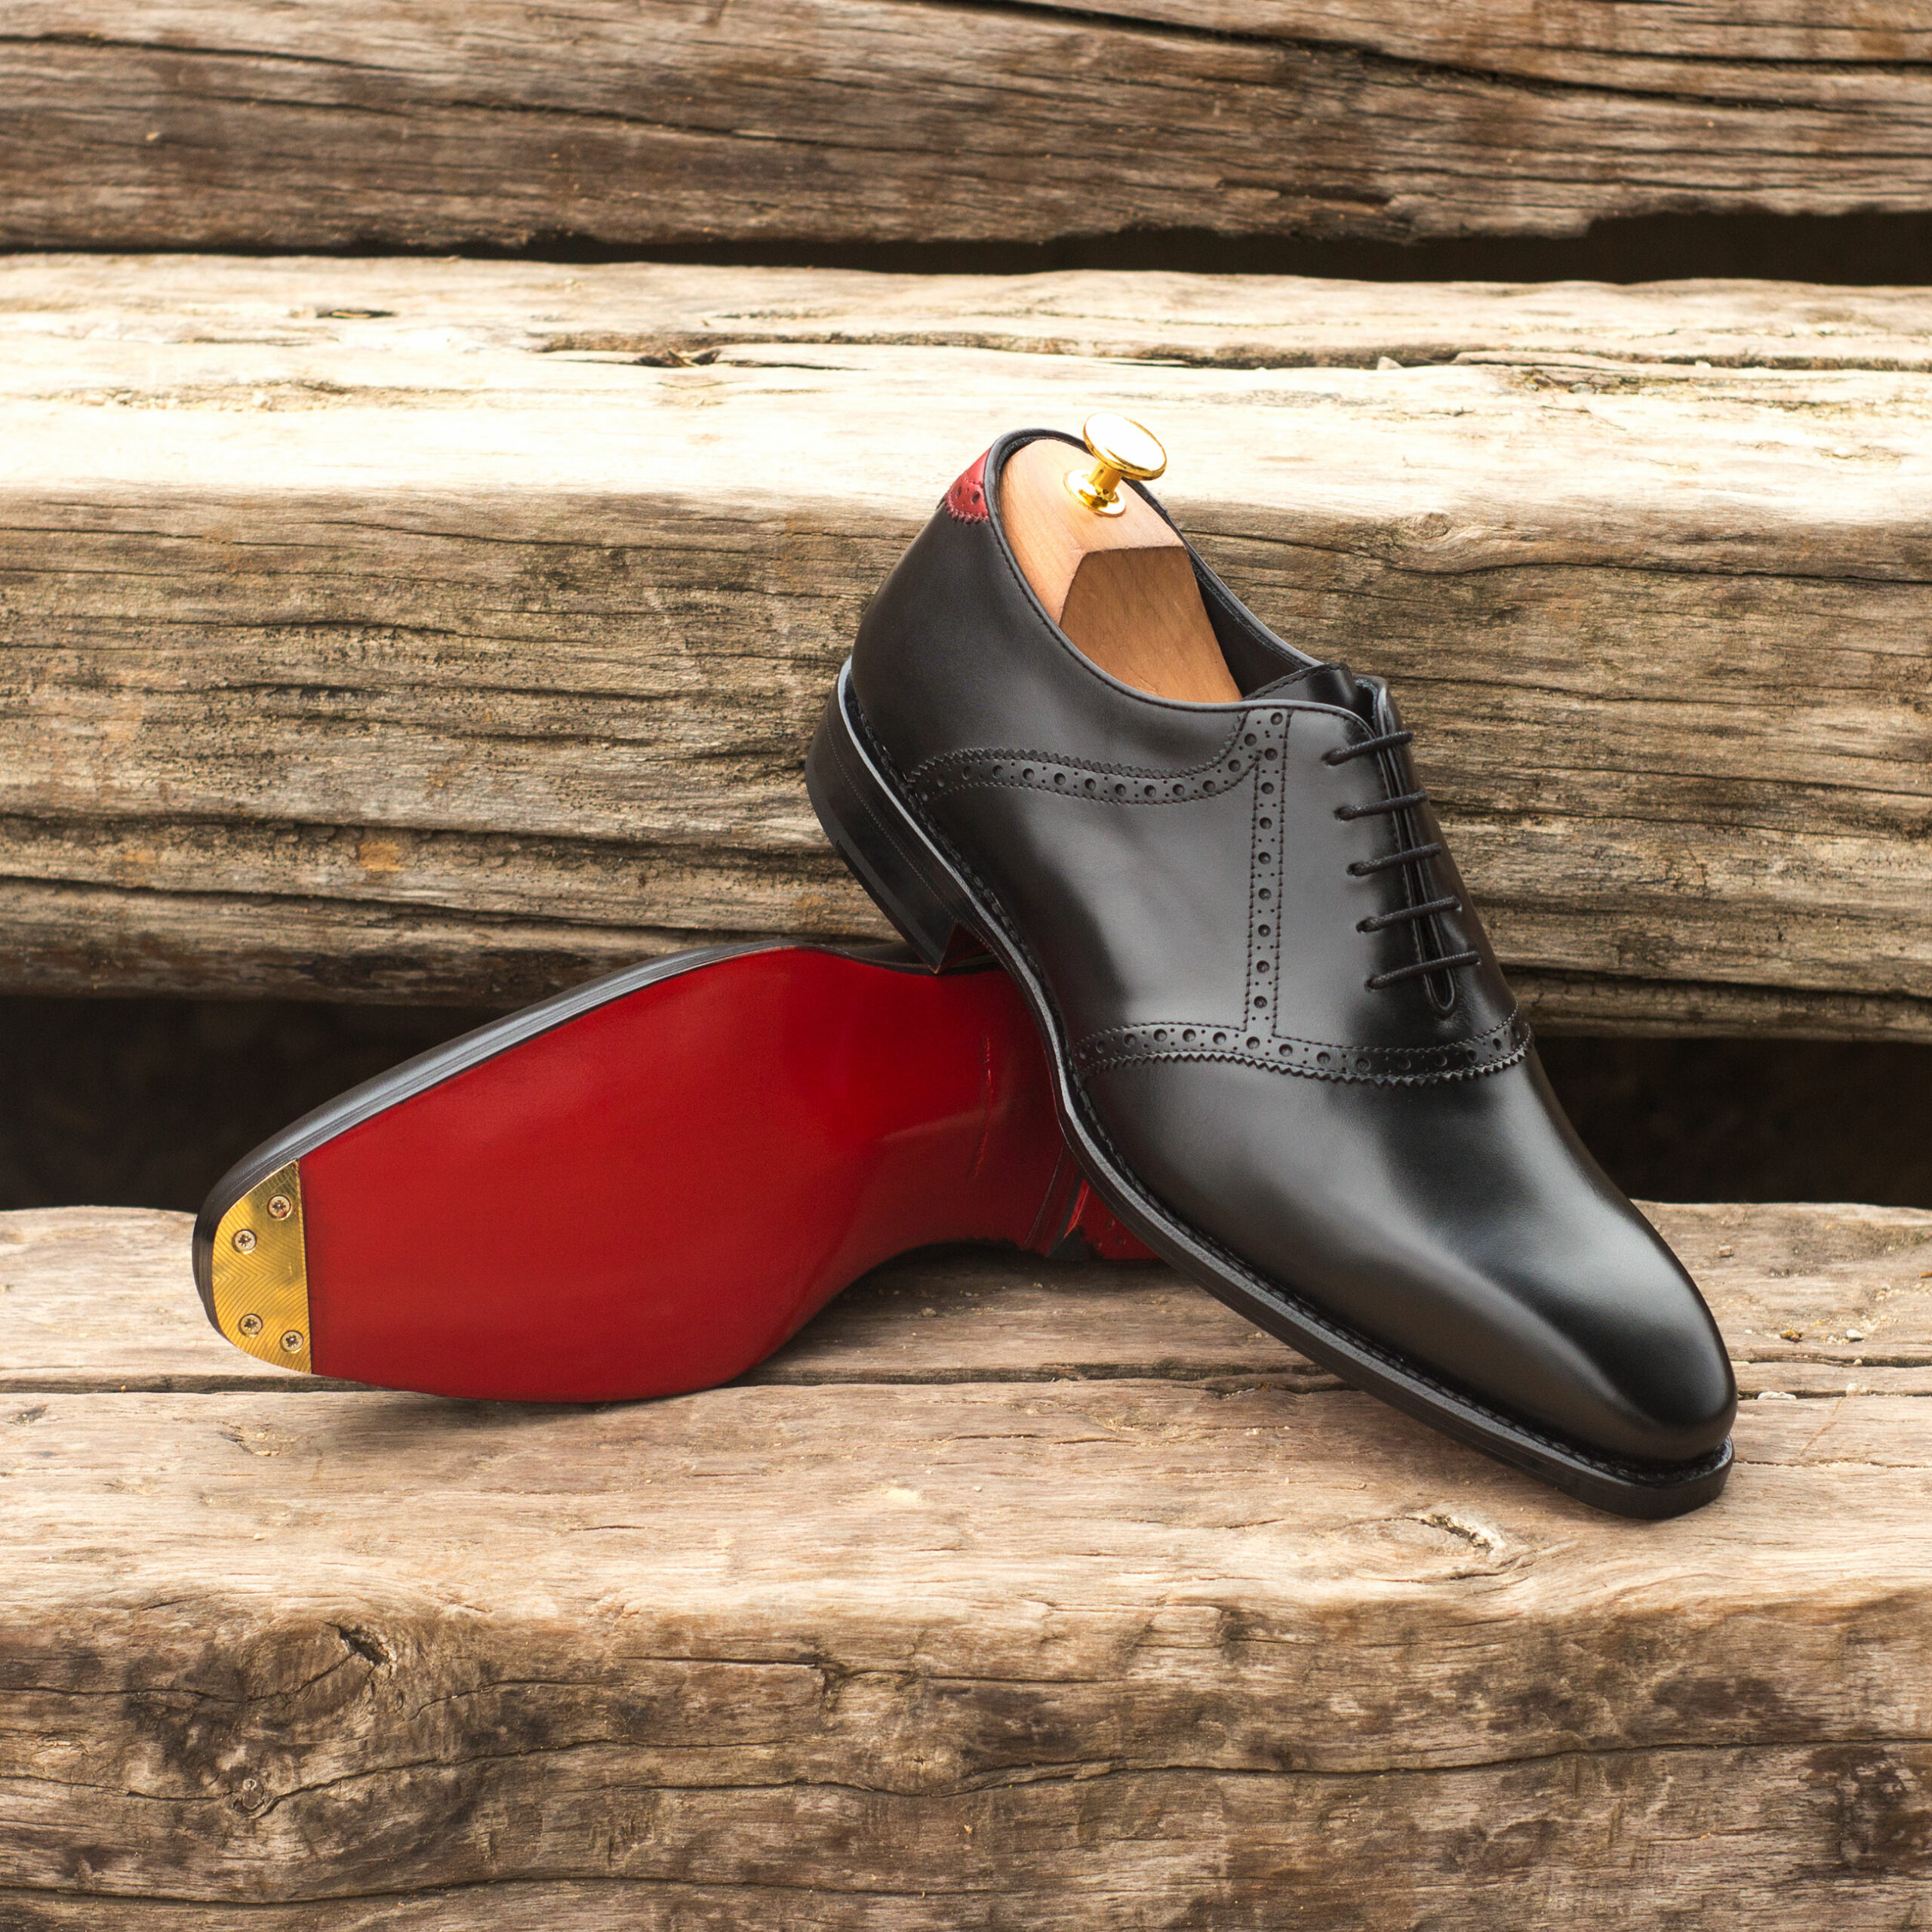 Box Calf And Painted Calf Leather Saddle Shoes - Golf BespokeShoes